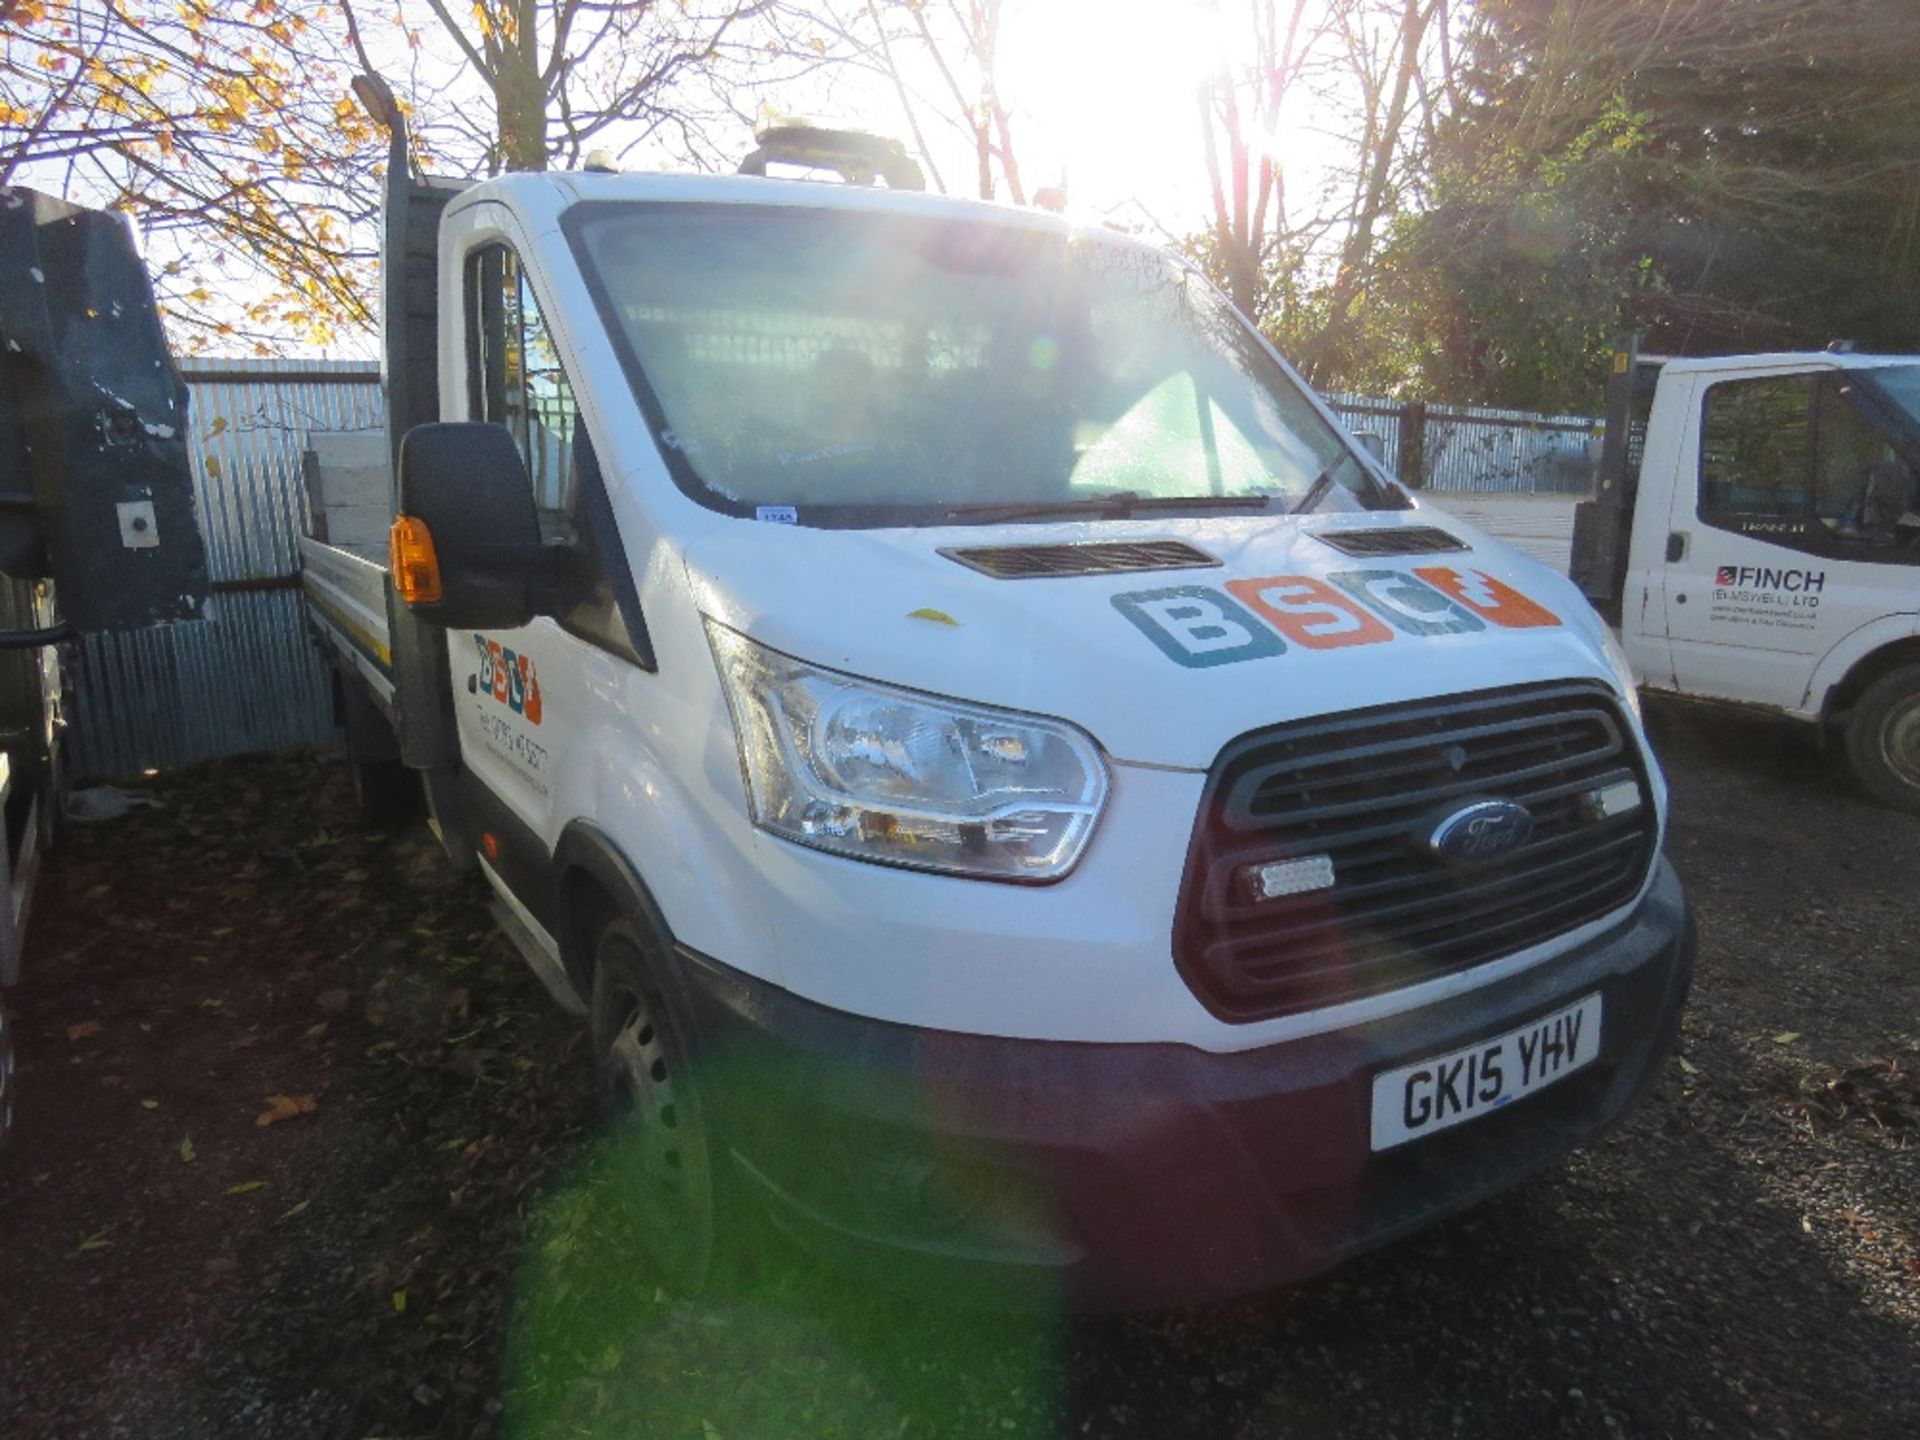 FORD TRANSIT 350 TWIN WHEEL 3.5TONNE DROP SIDE TRUCK WITH REAR TAIL LIFT REG:GK15 YHV. 216,966 REC M - Image 2 of 10